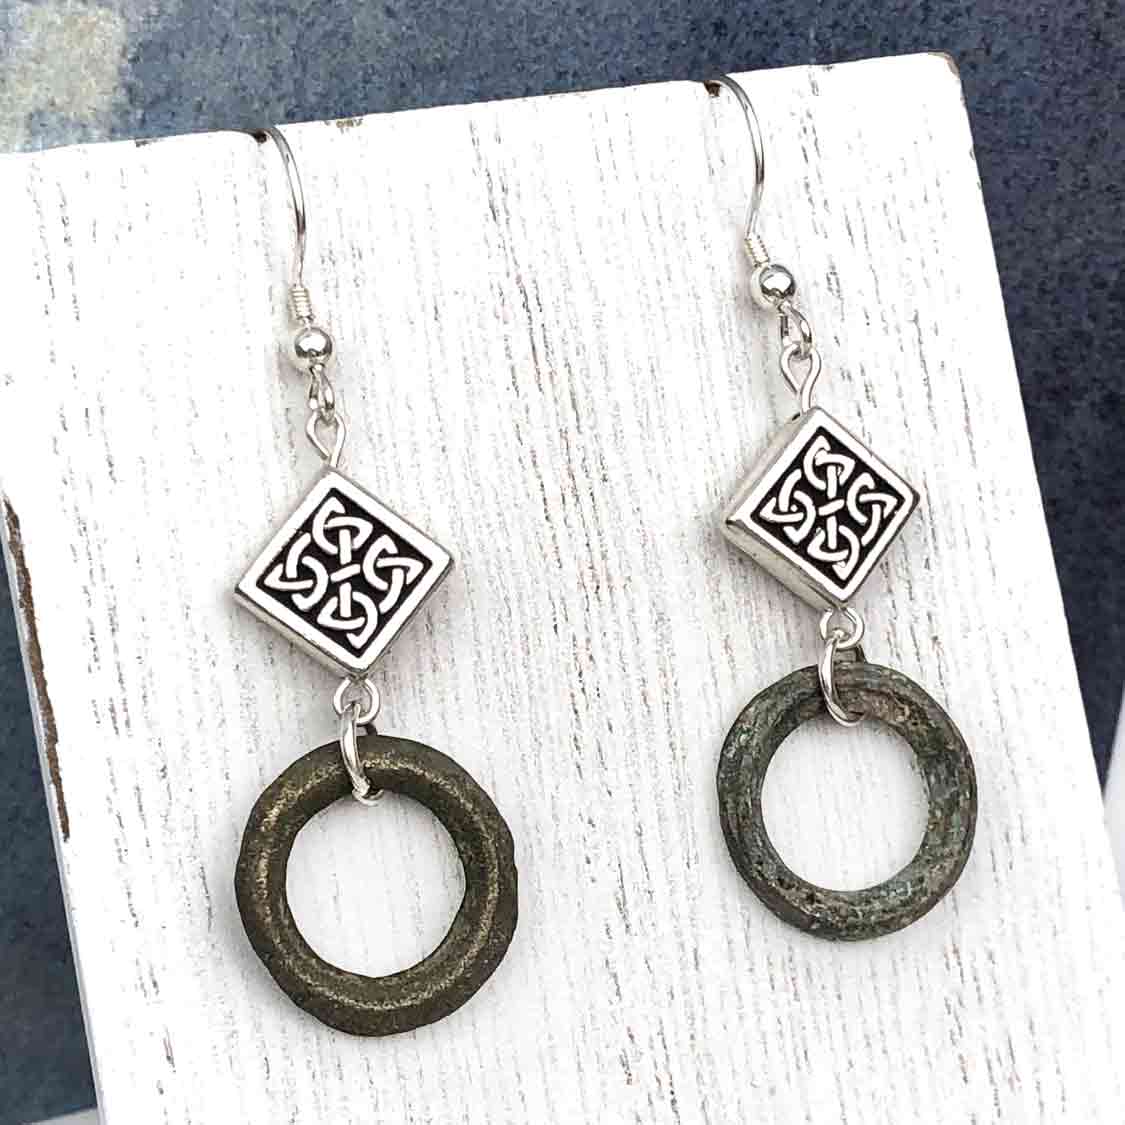 Thick Smooth Bronze Celtic Ring Money Earrings with Celtic Knot Charms